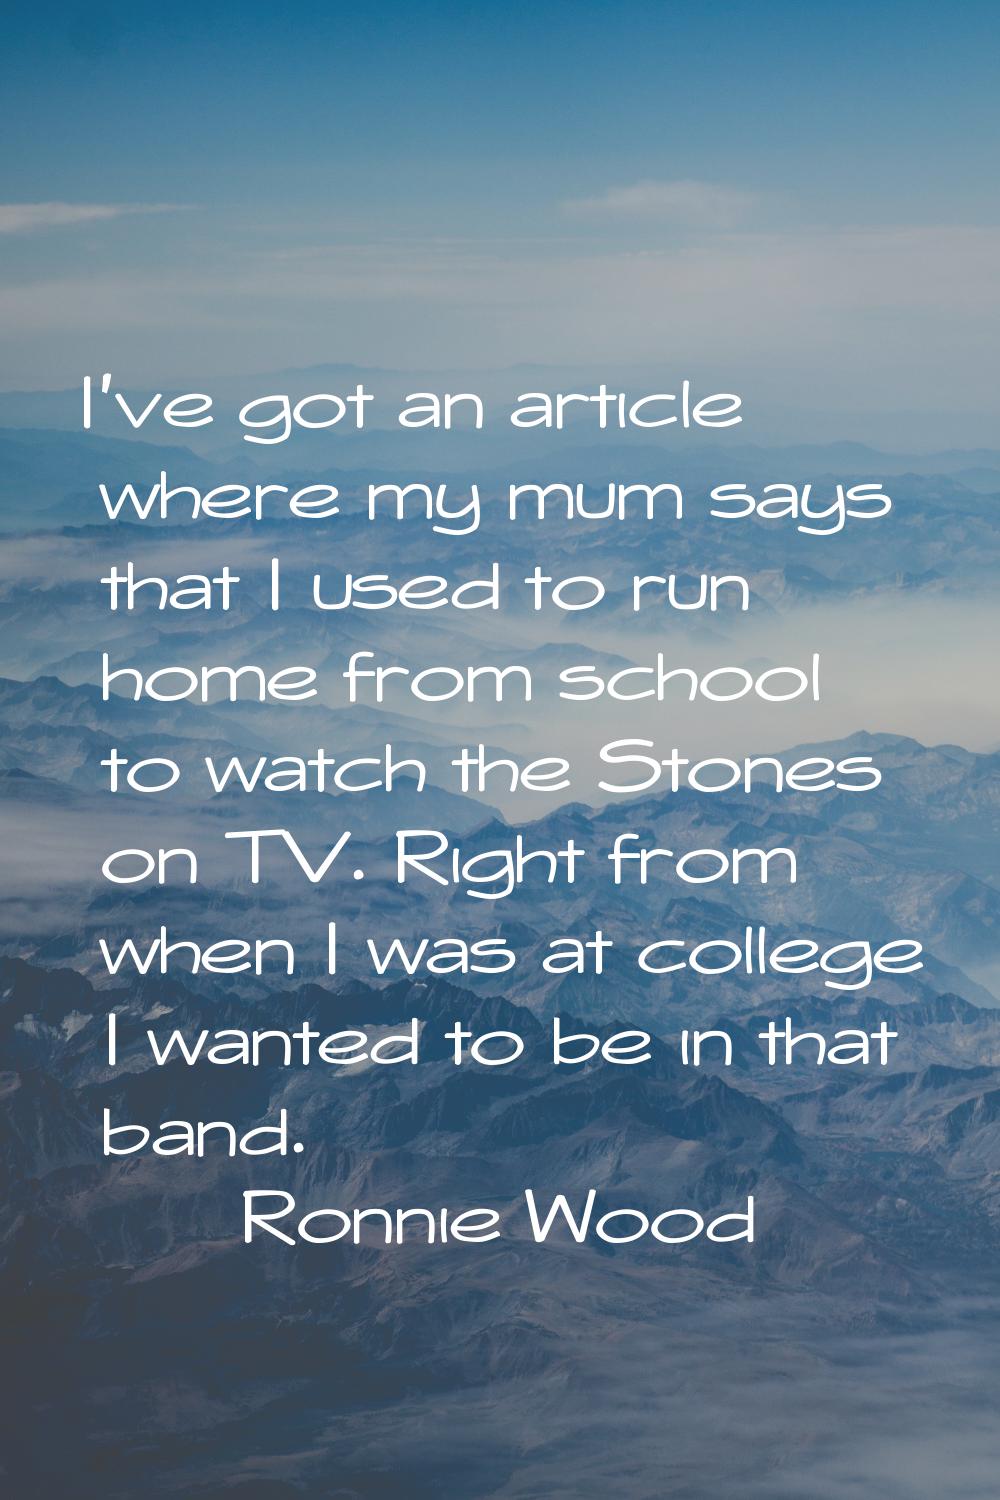 I've got an article where my mum says that I used to run home from school to watch the Stones on TV